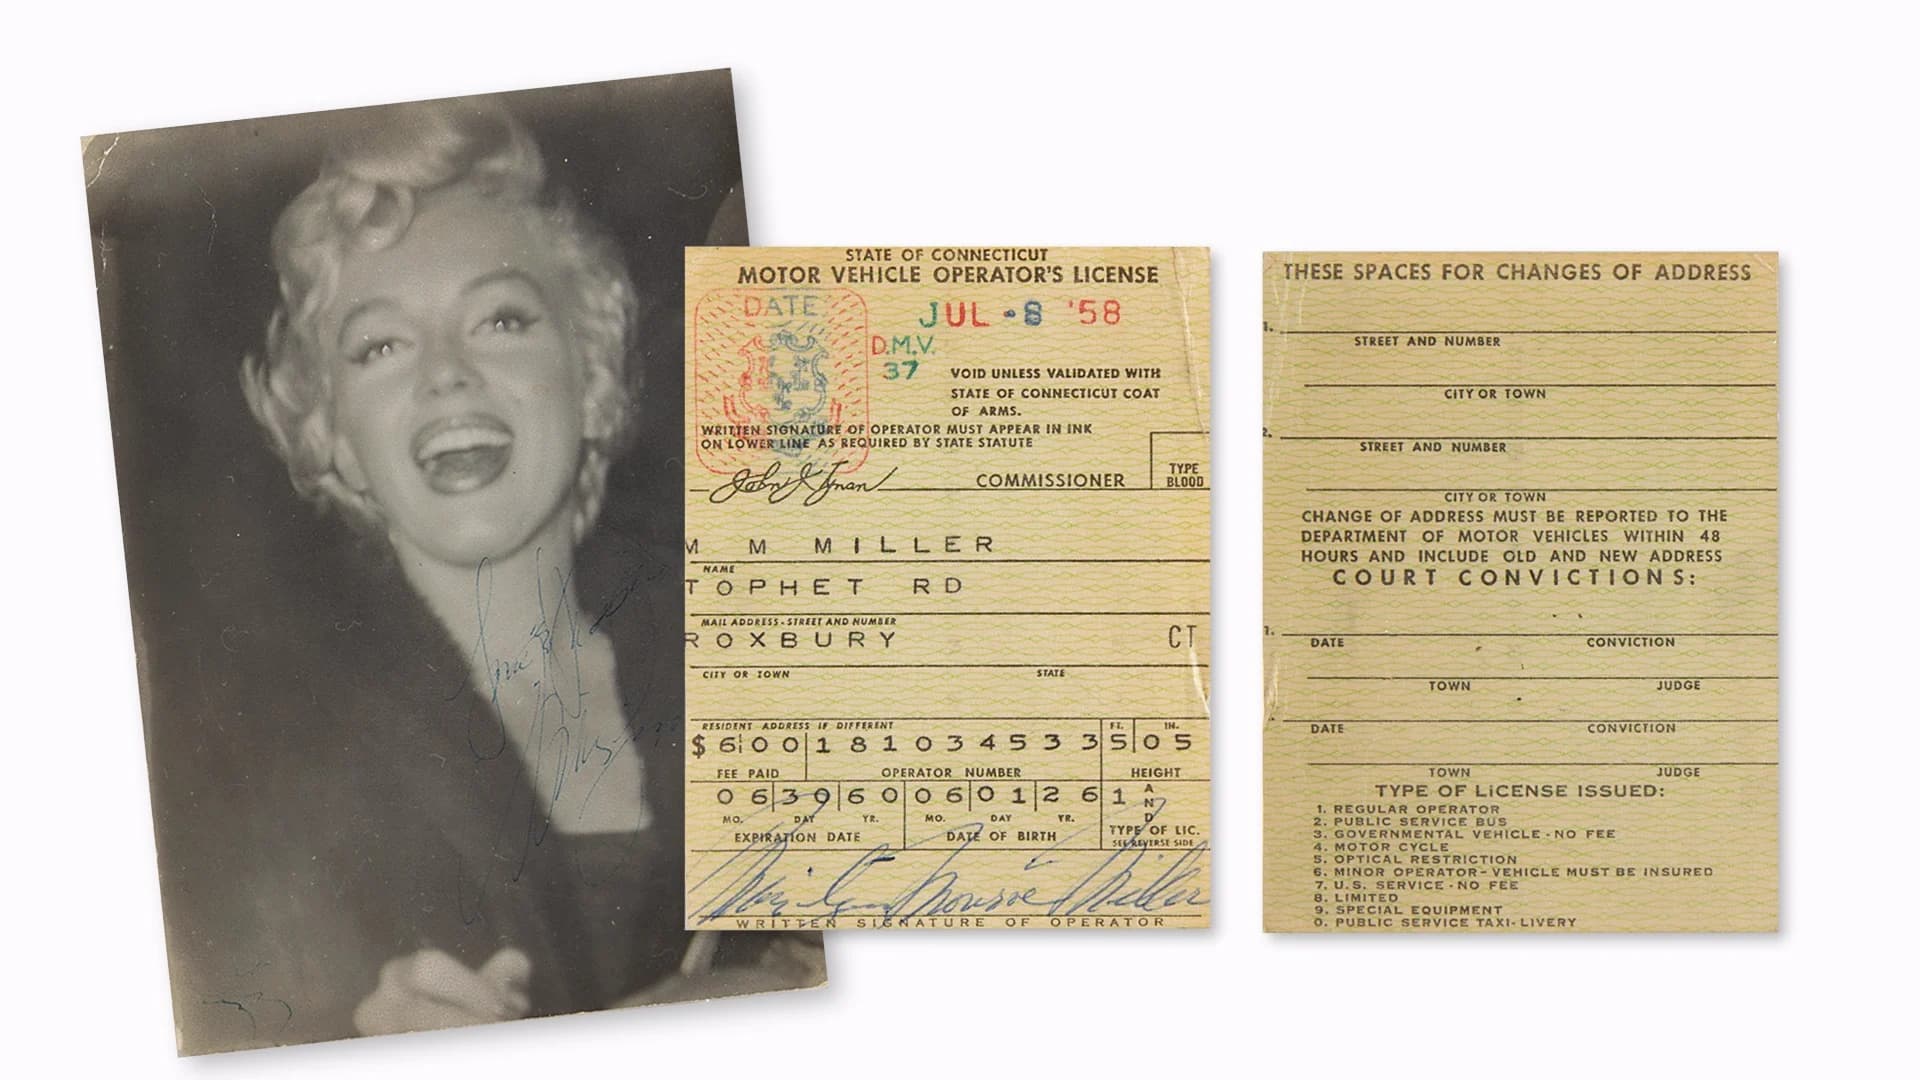 Marilyn Monroe's CT driver's license up for auction